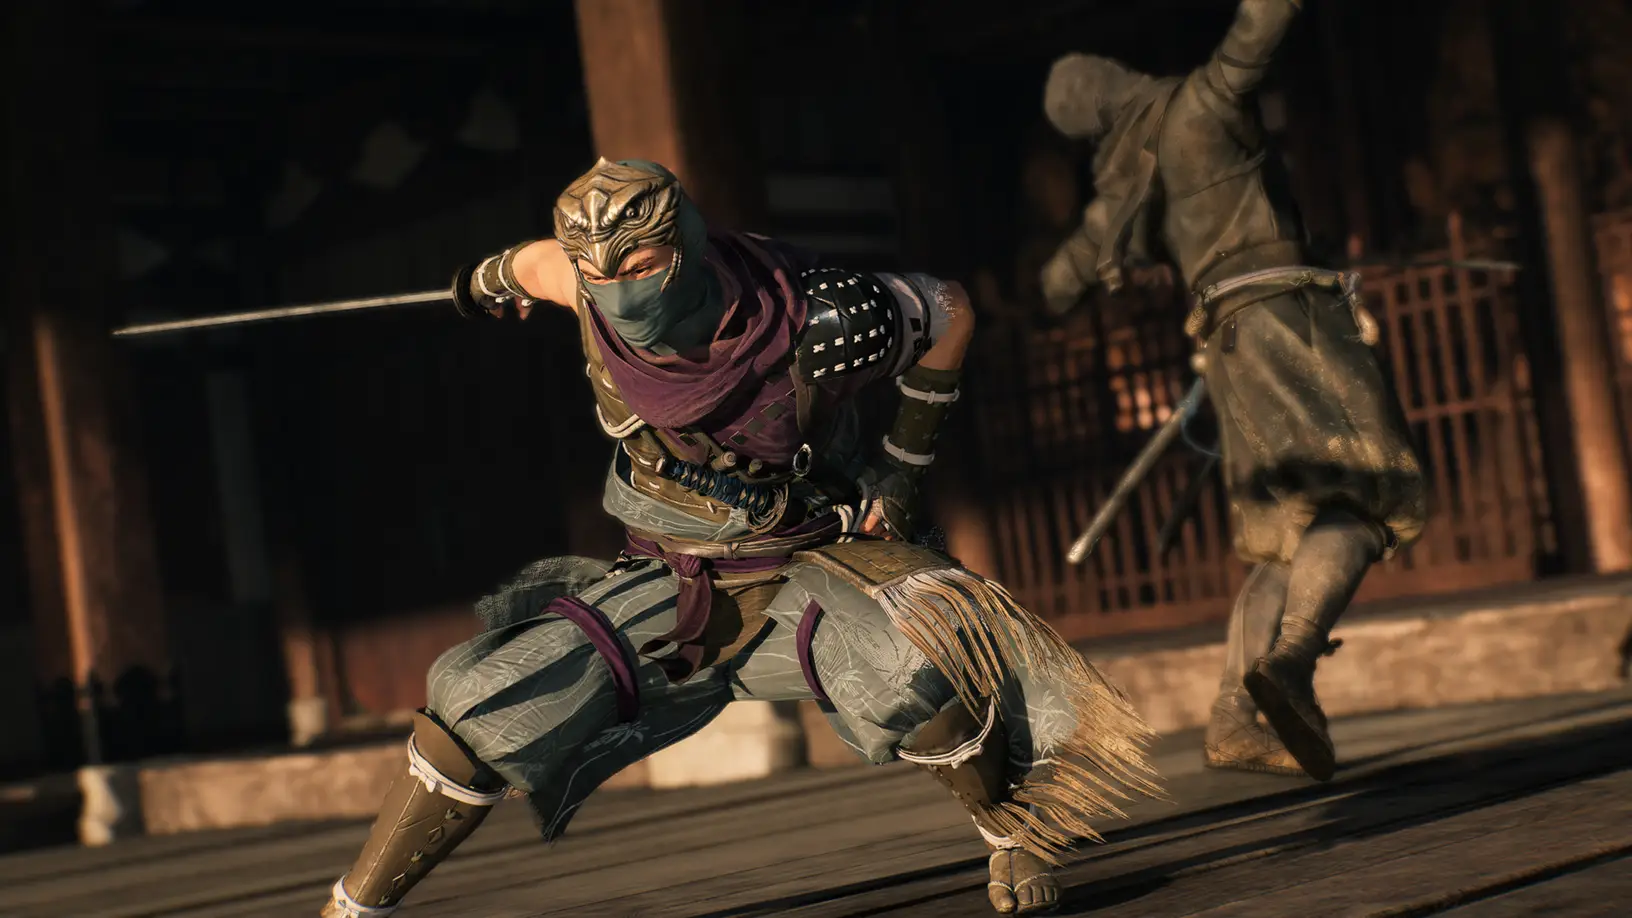 PlayStation Celebrates Rise of the Ronin with Exciting Behind-the-Scenes Insights